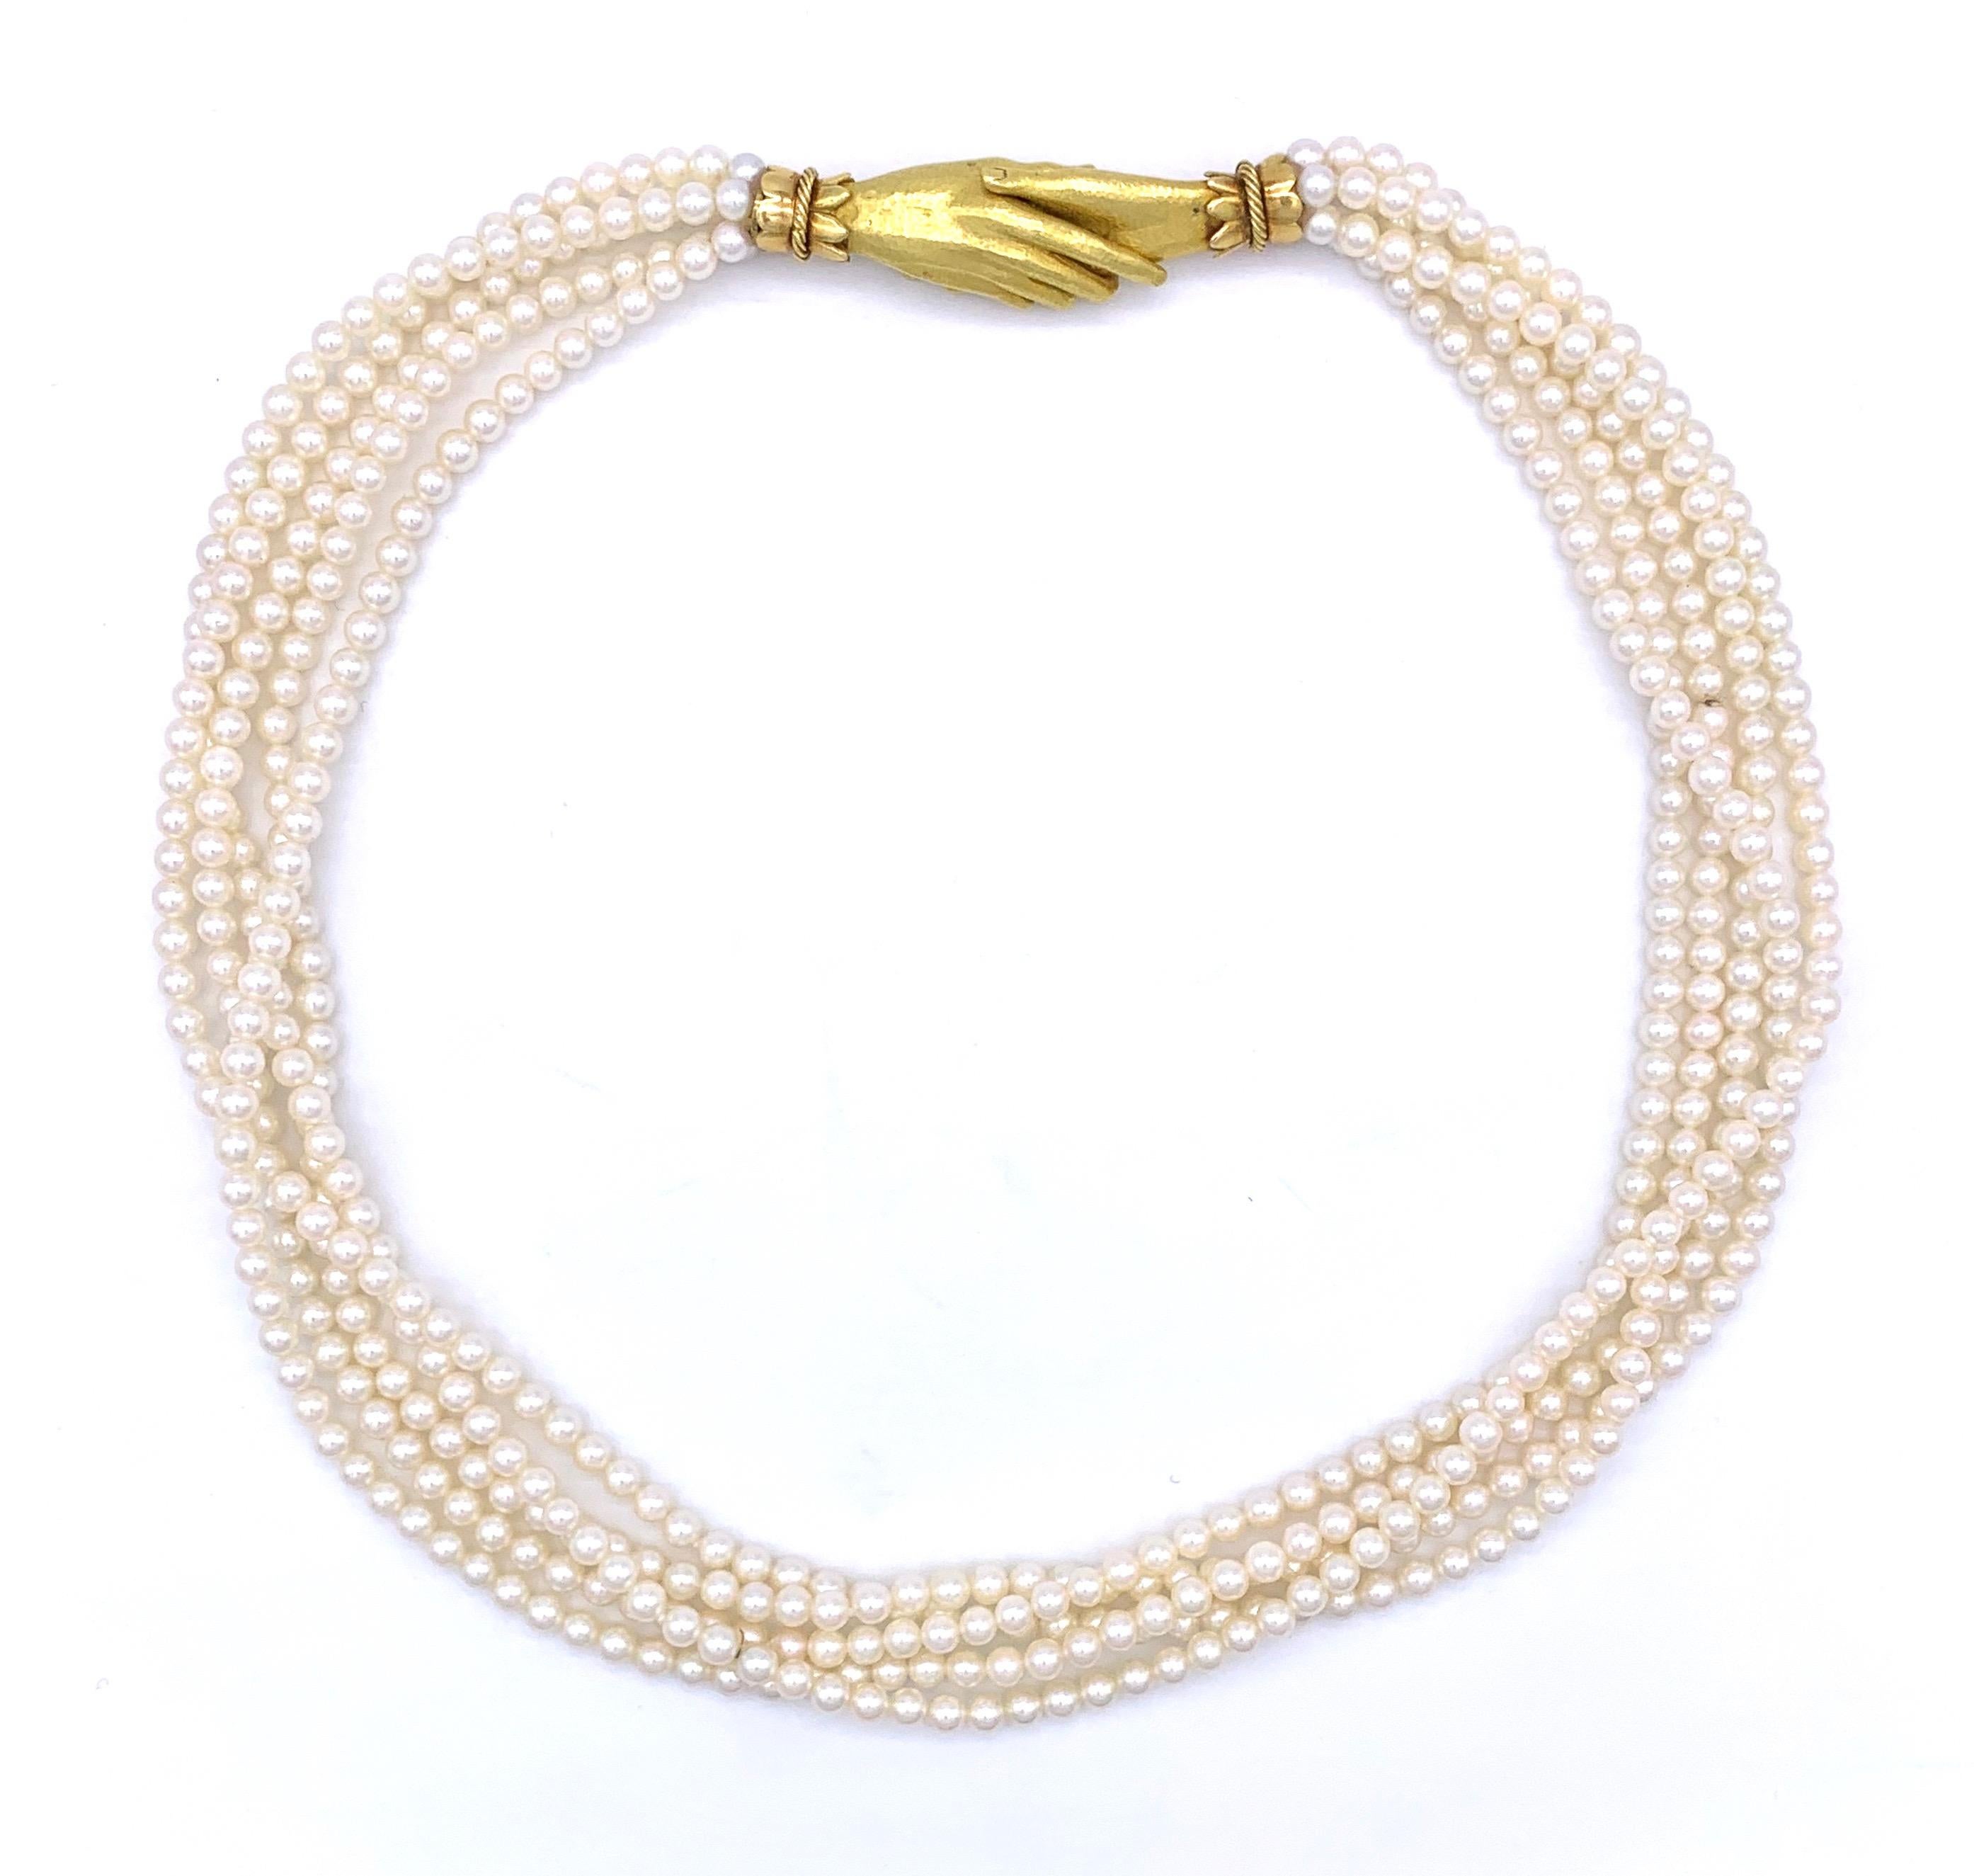 Two finely modelled joined hands double as a clasp and make this five strand Akoya cultered pearl necklace a truly sentimental gift, a token of friendship and love. Five rows of the finest, completely round and beautifully matched pearls make up